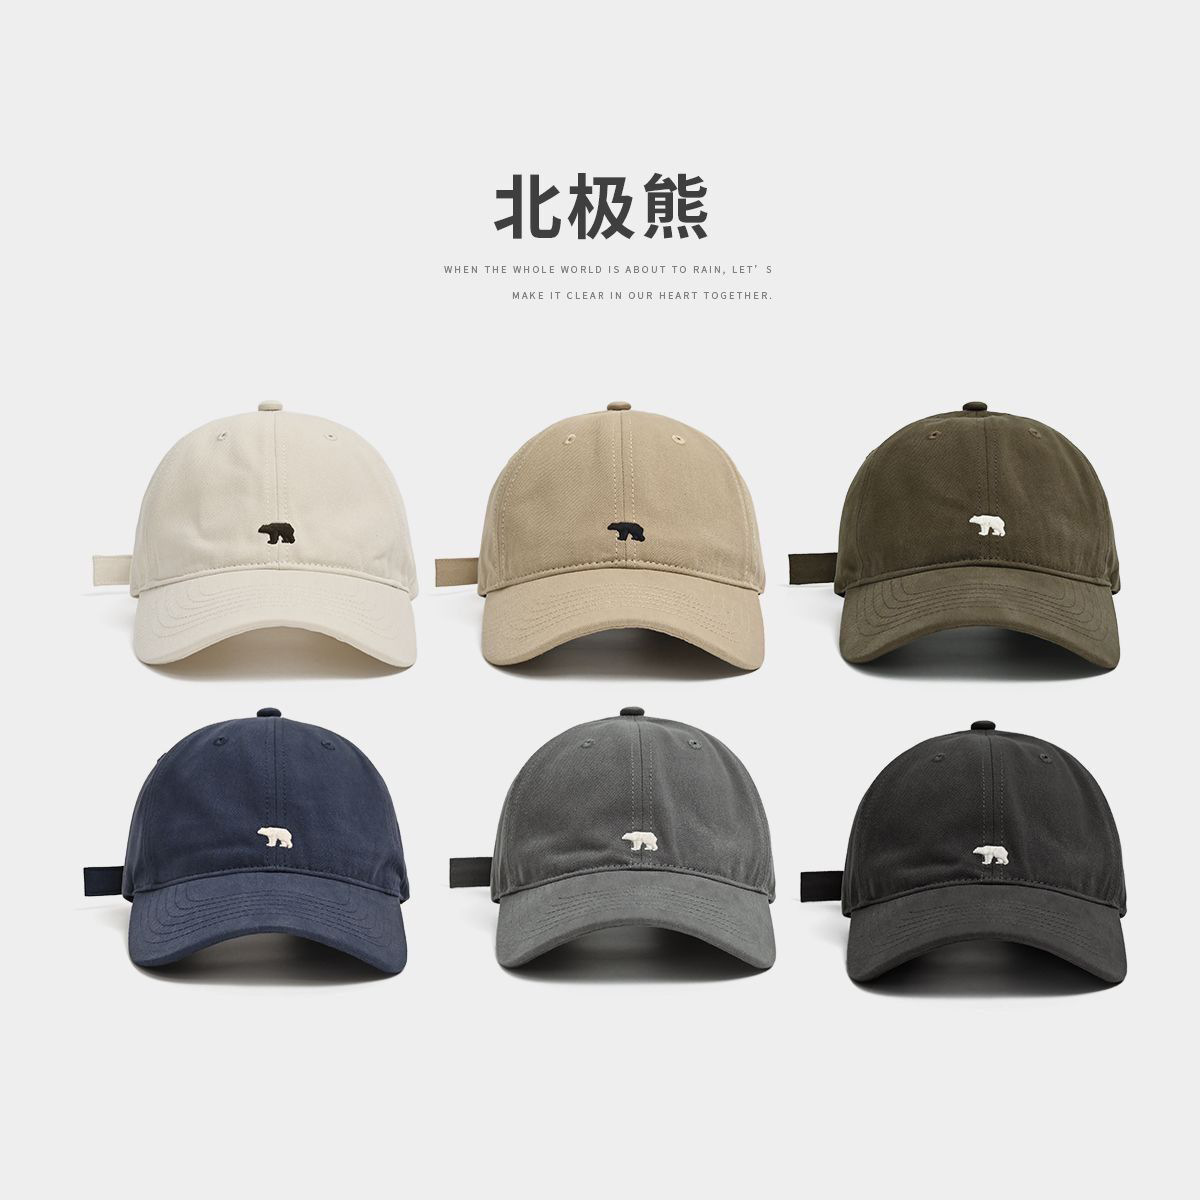 men‘s and women‘s fashion four seasons hat polar bear embroidered baseball cap sunshade outdoor simplicity solid color soft top peak cap